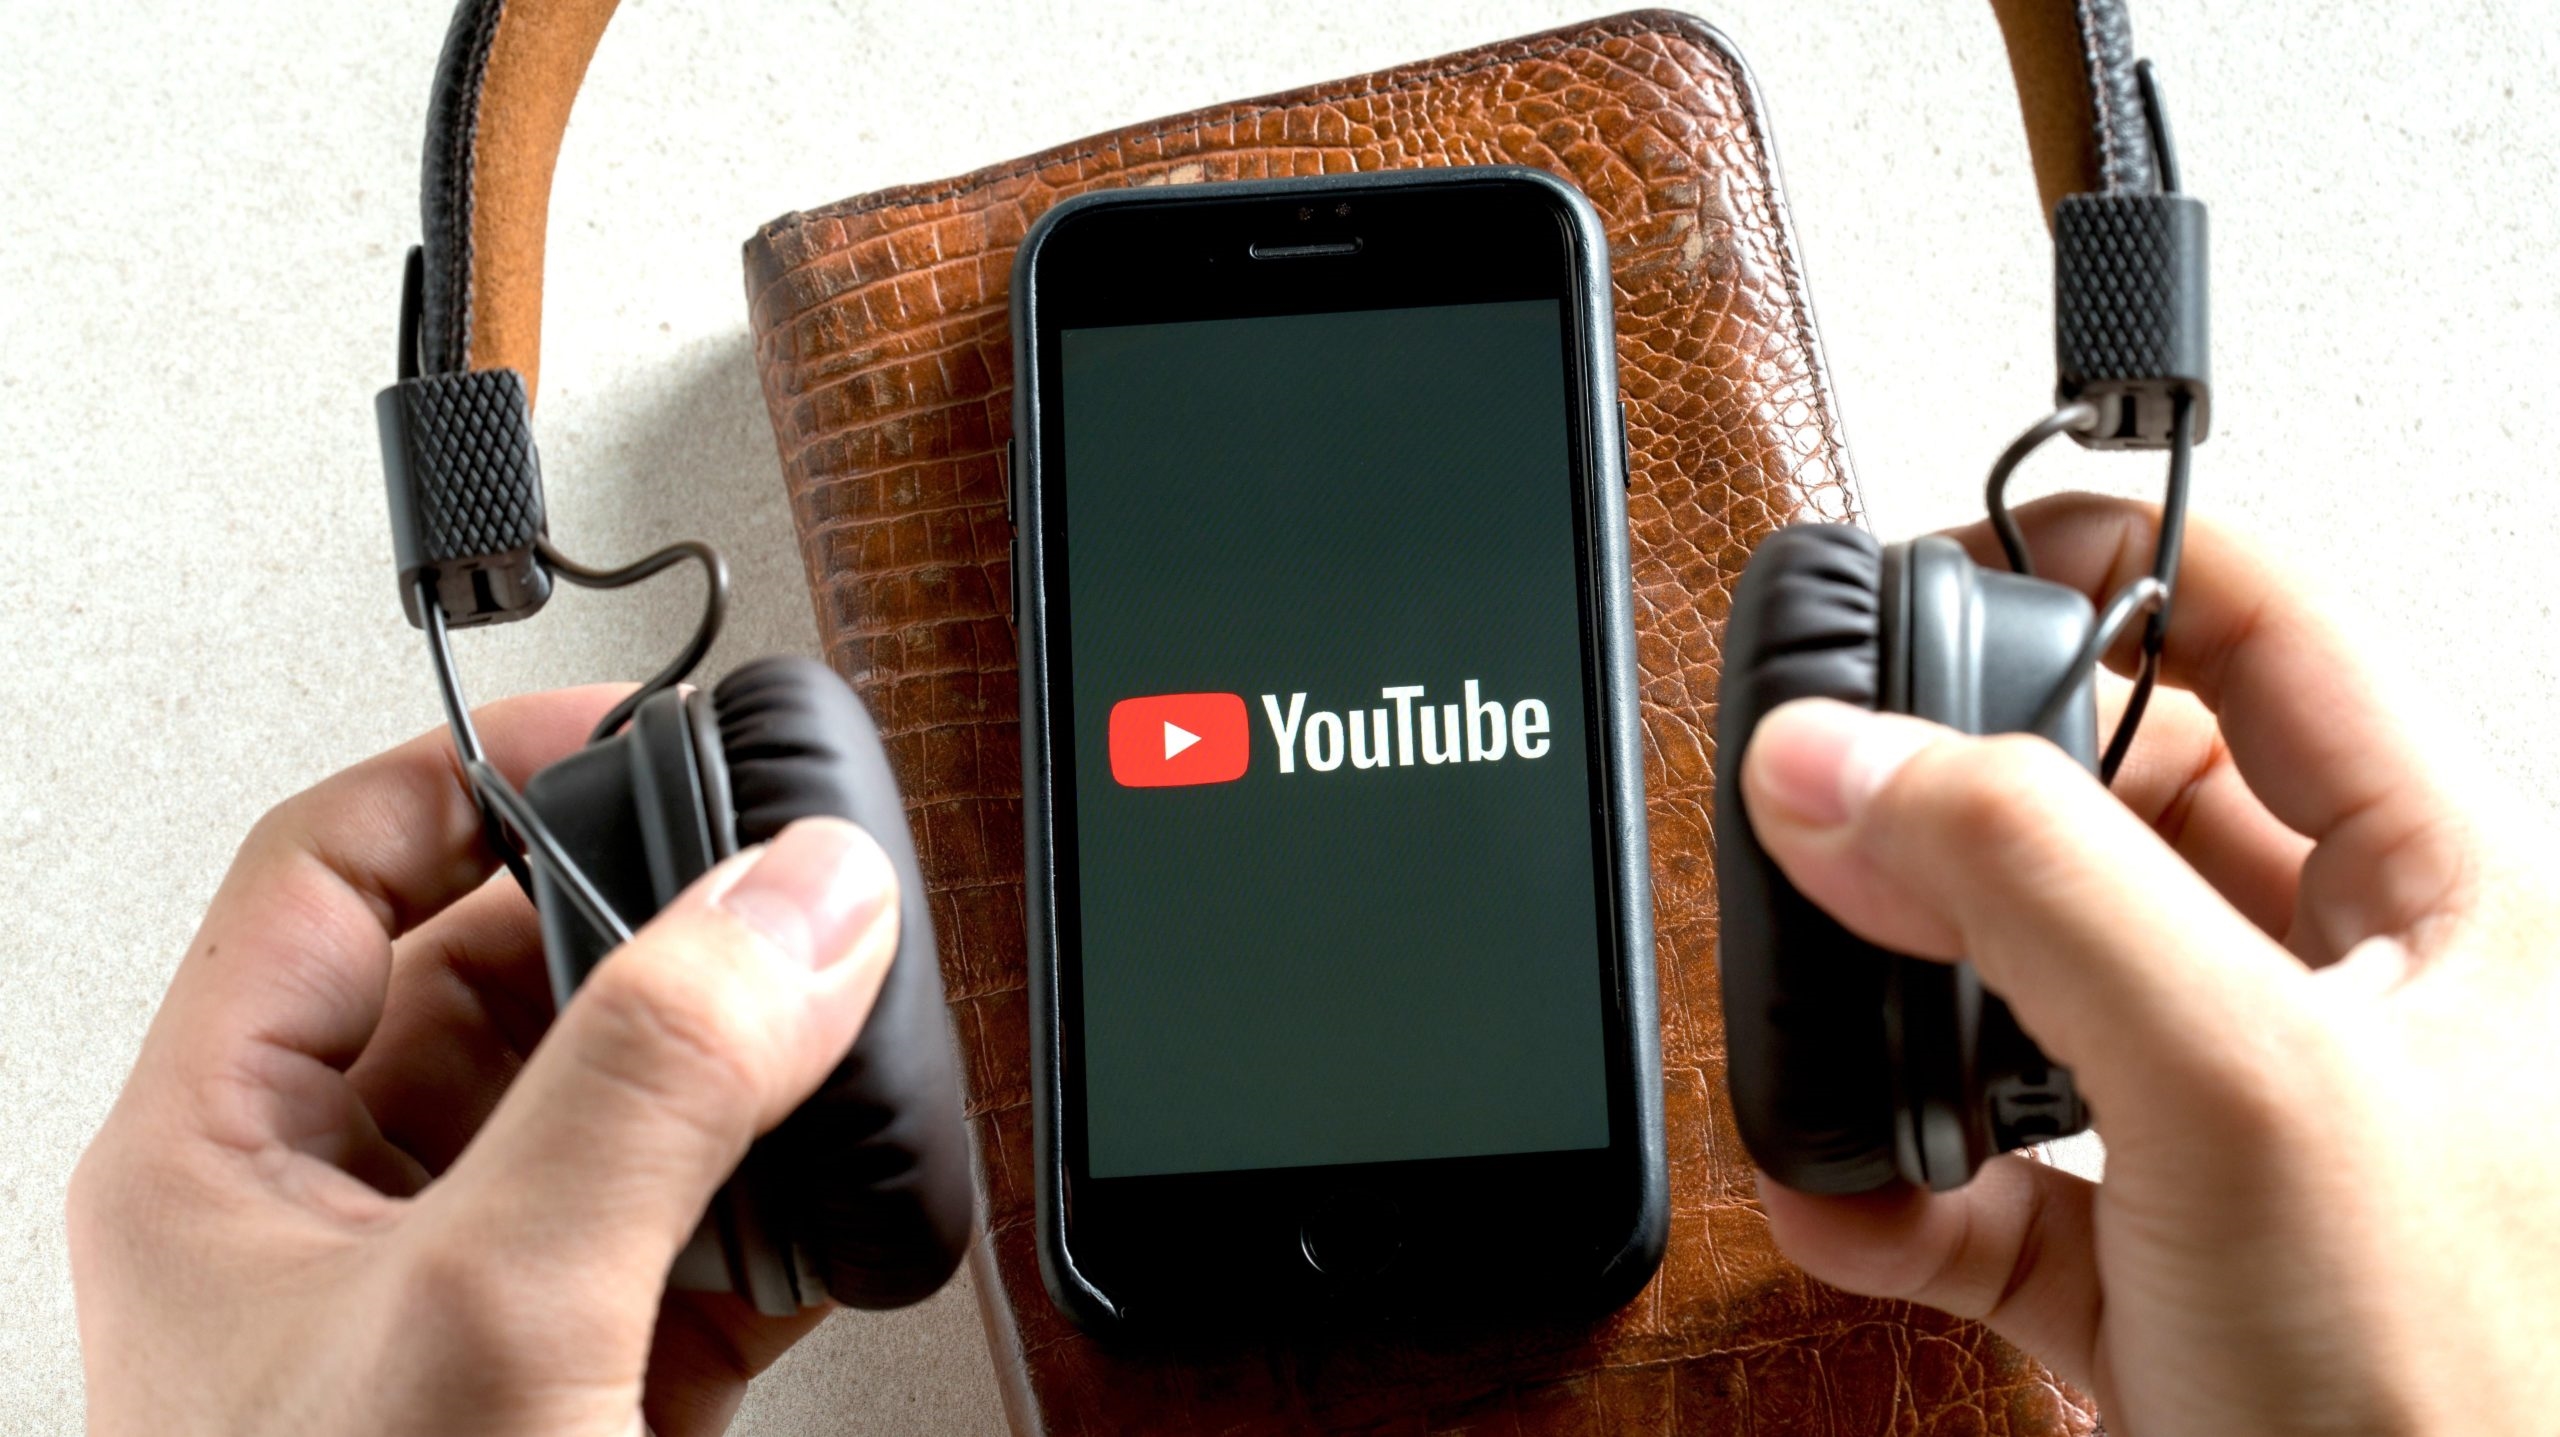 The Ultimate Guide to Converting YouTube Videos to MP3 Files: How to Easily Download Audio from YouTube as MMP3